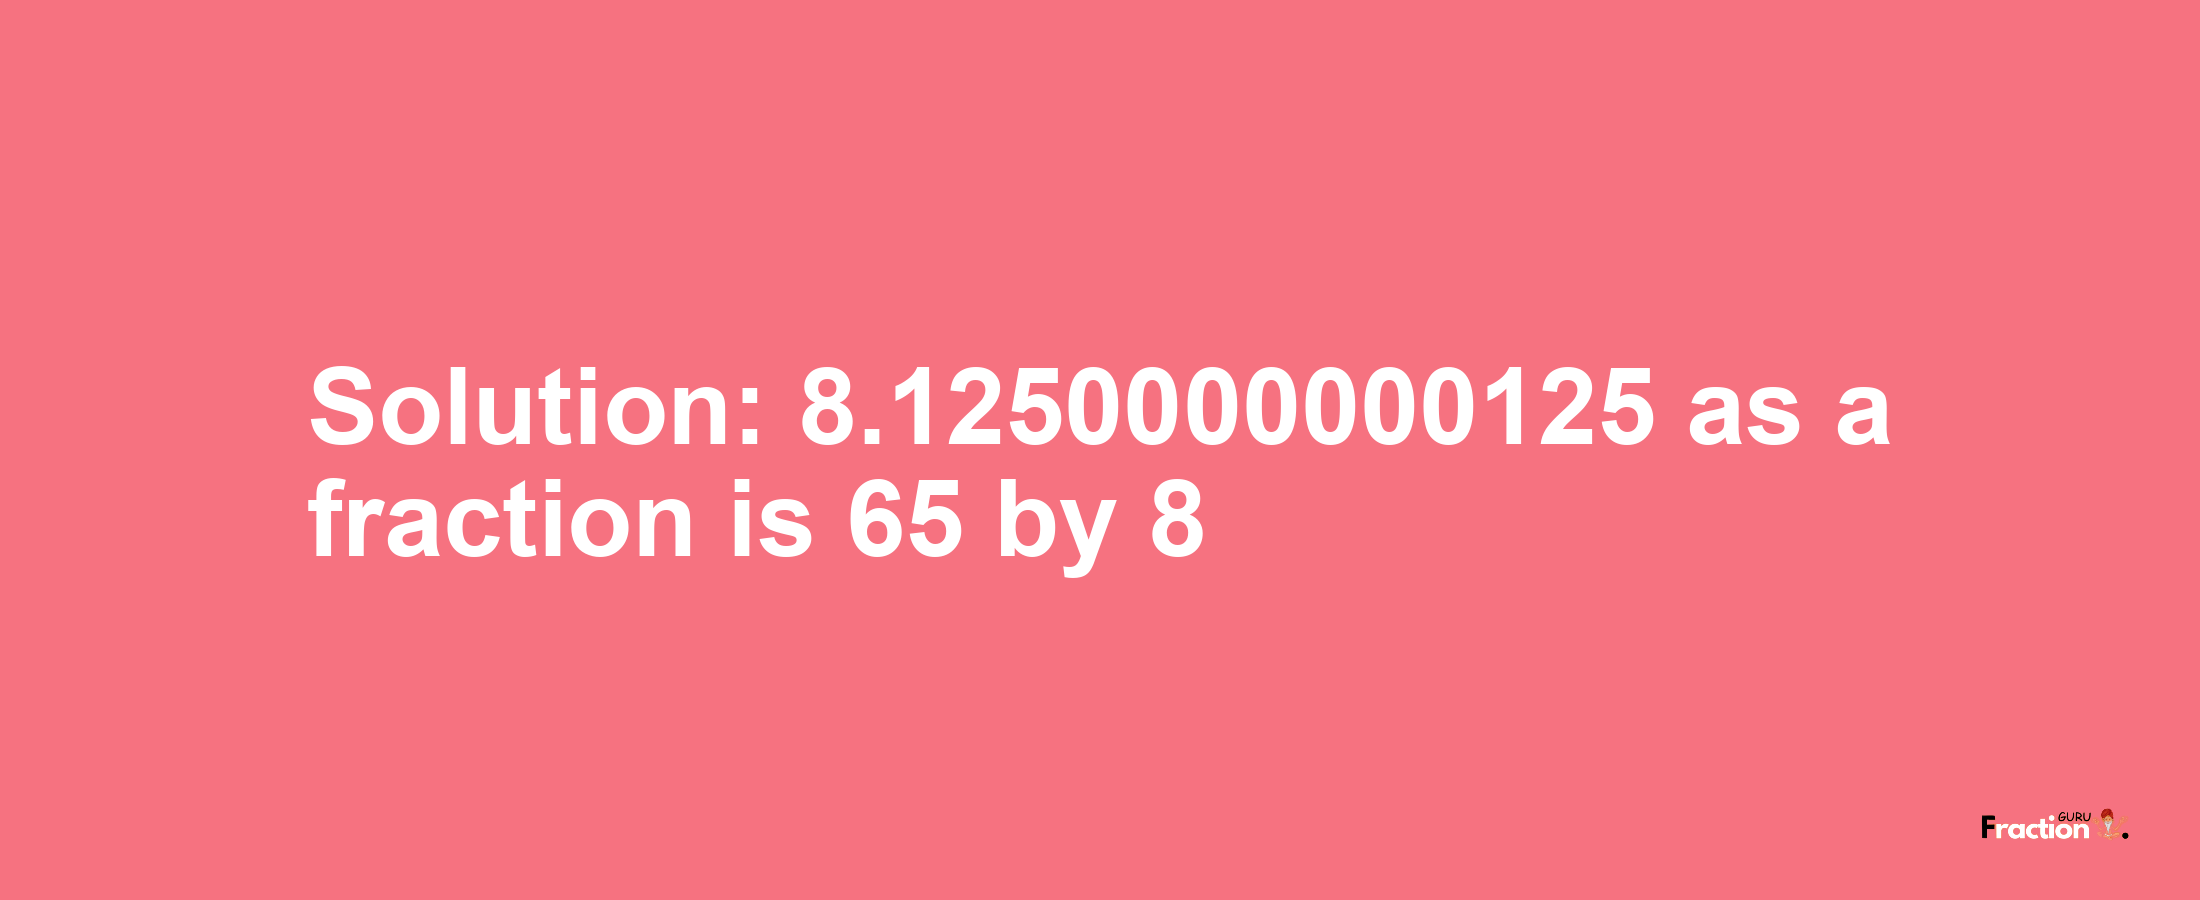 Solution:8.1250000000125 as a fraction is 65/8